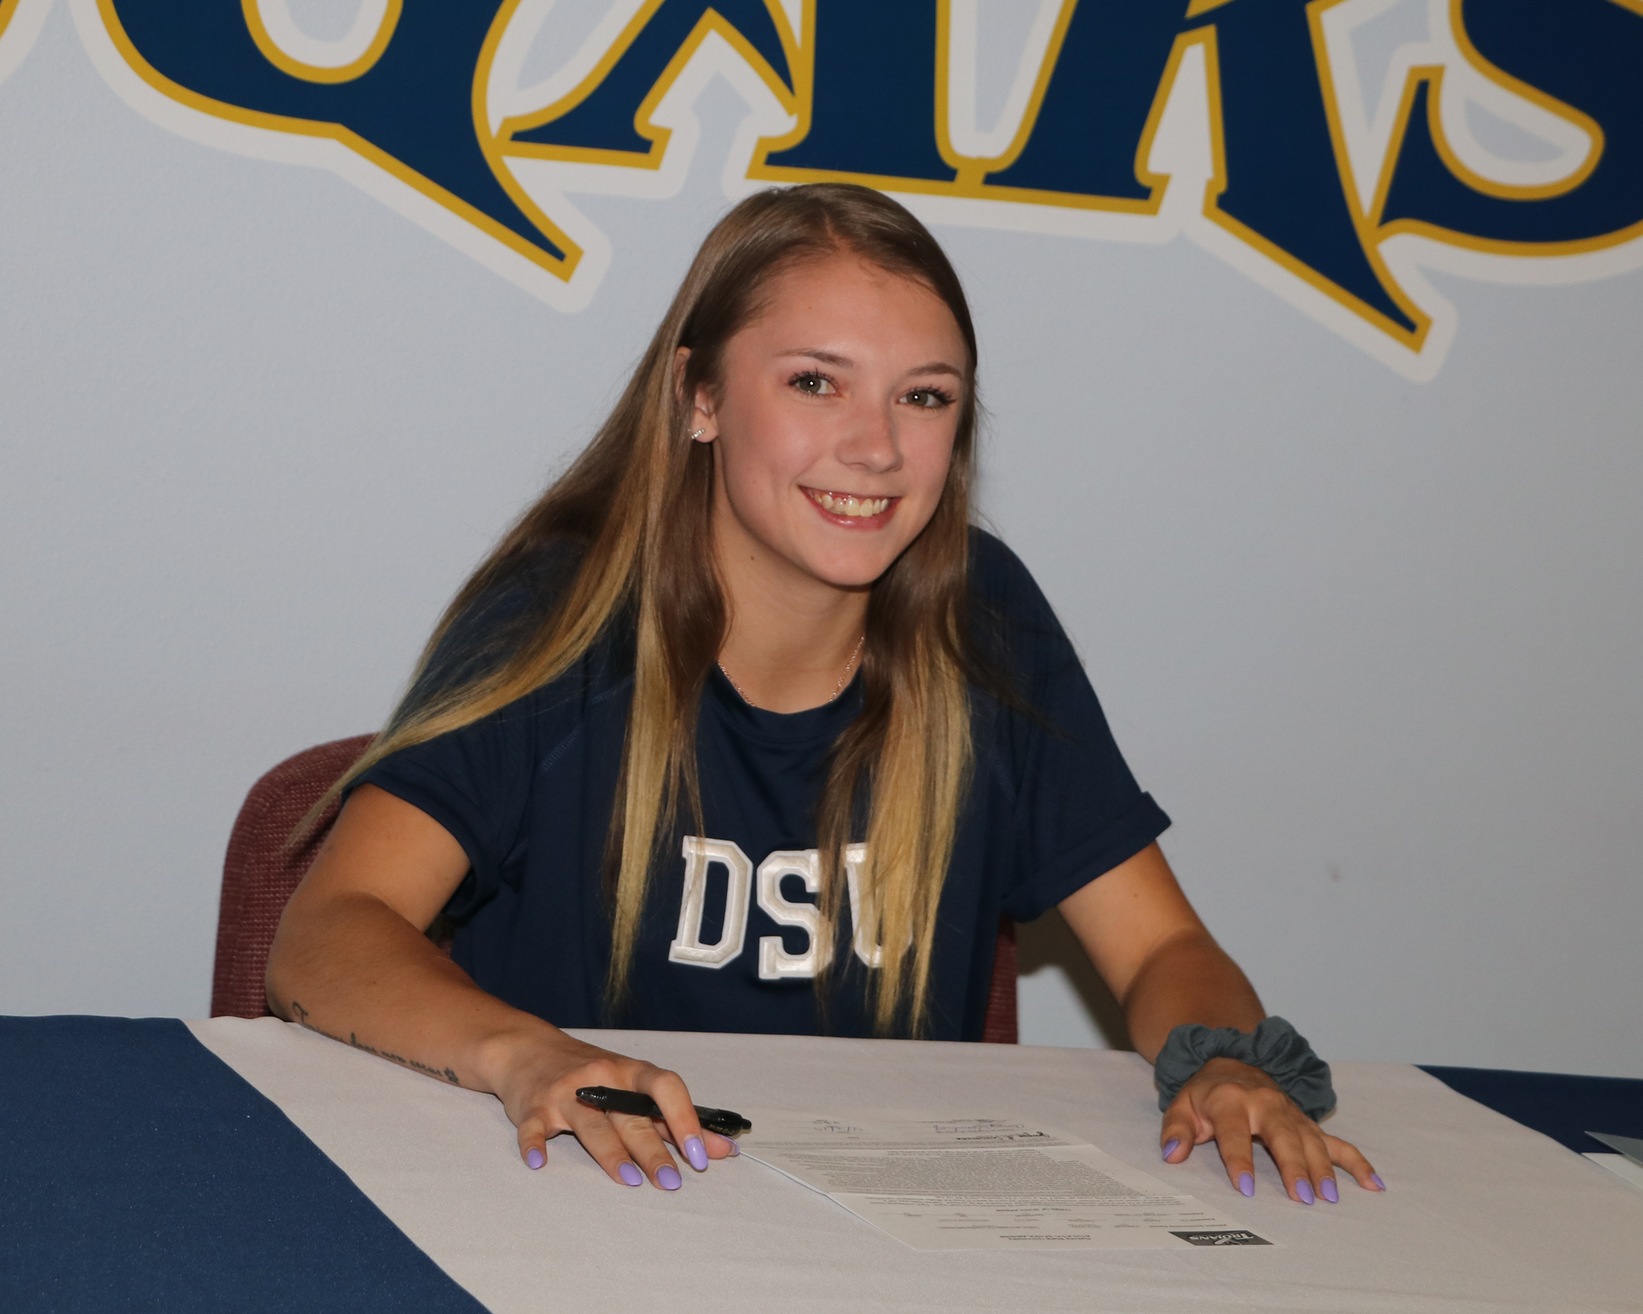 WNCC’s Commins headed to Dakota State for volleyball